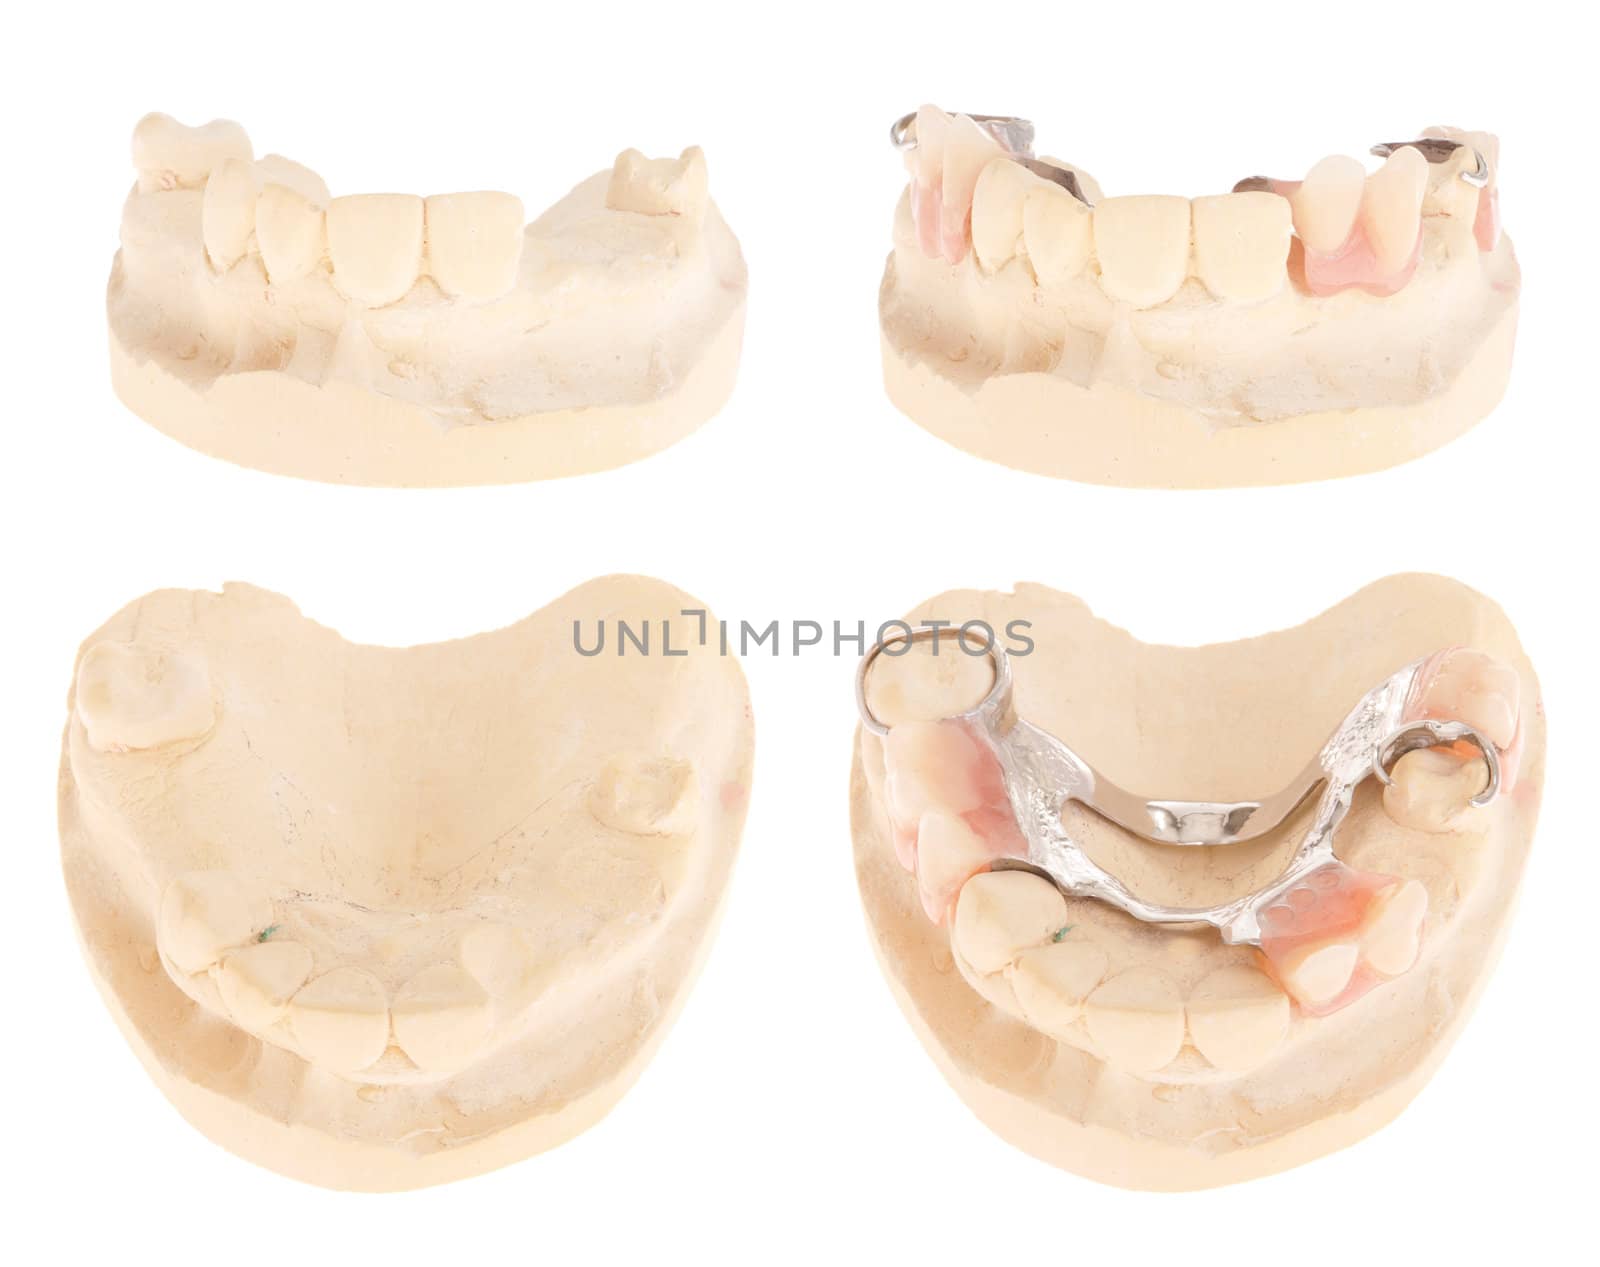 cast model with missing teeth and with chrome cobalt denture (isolated on white background)